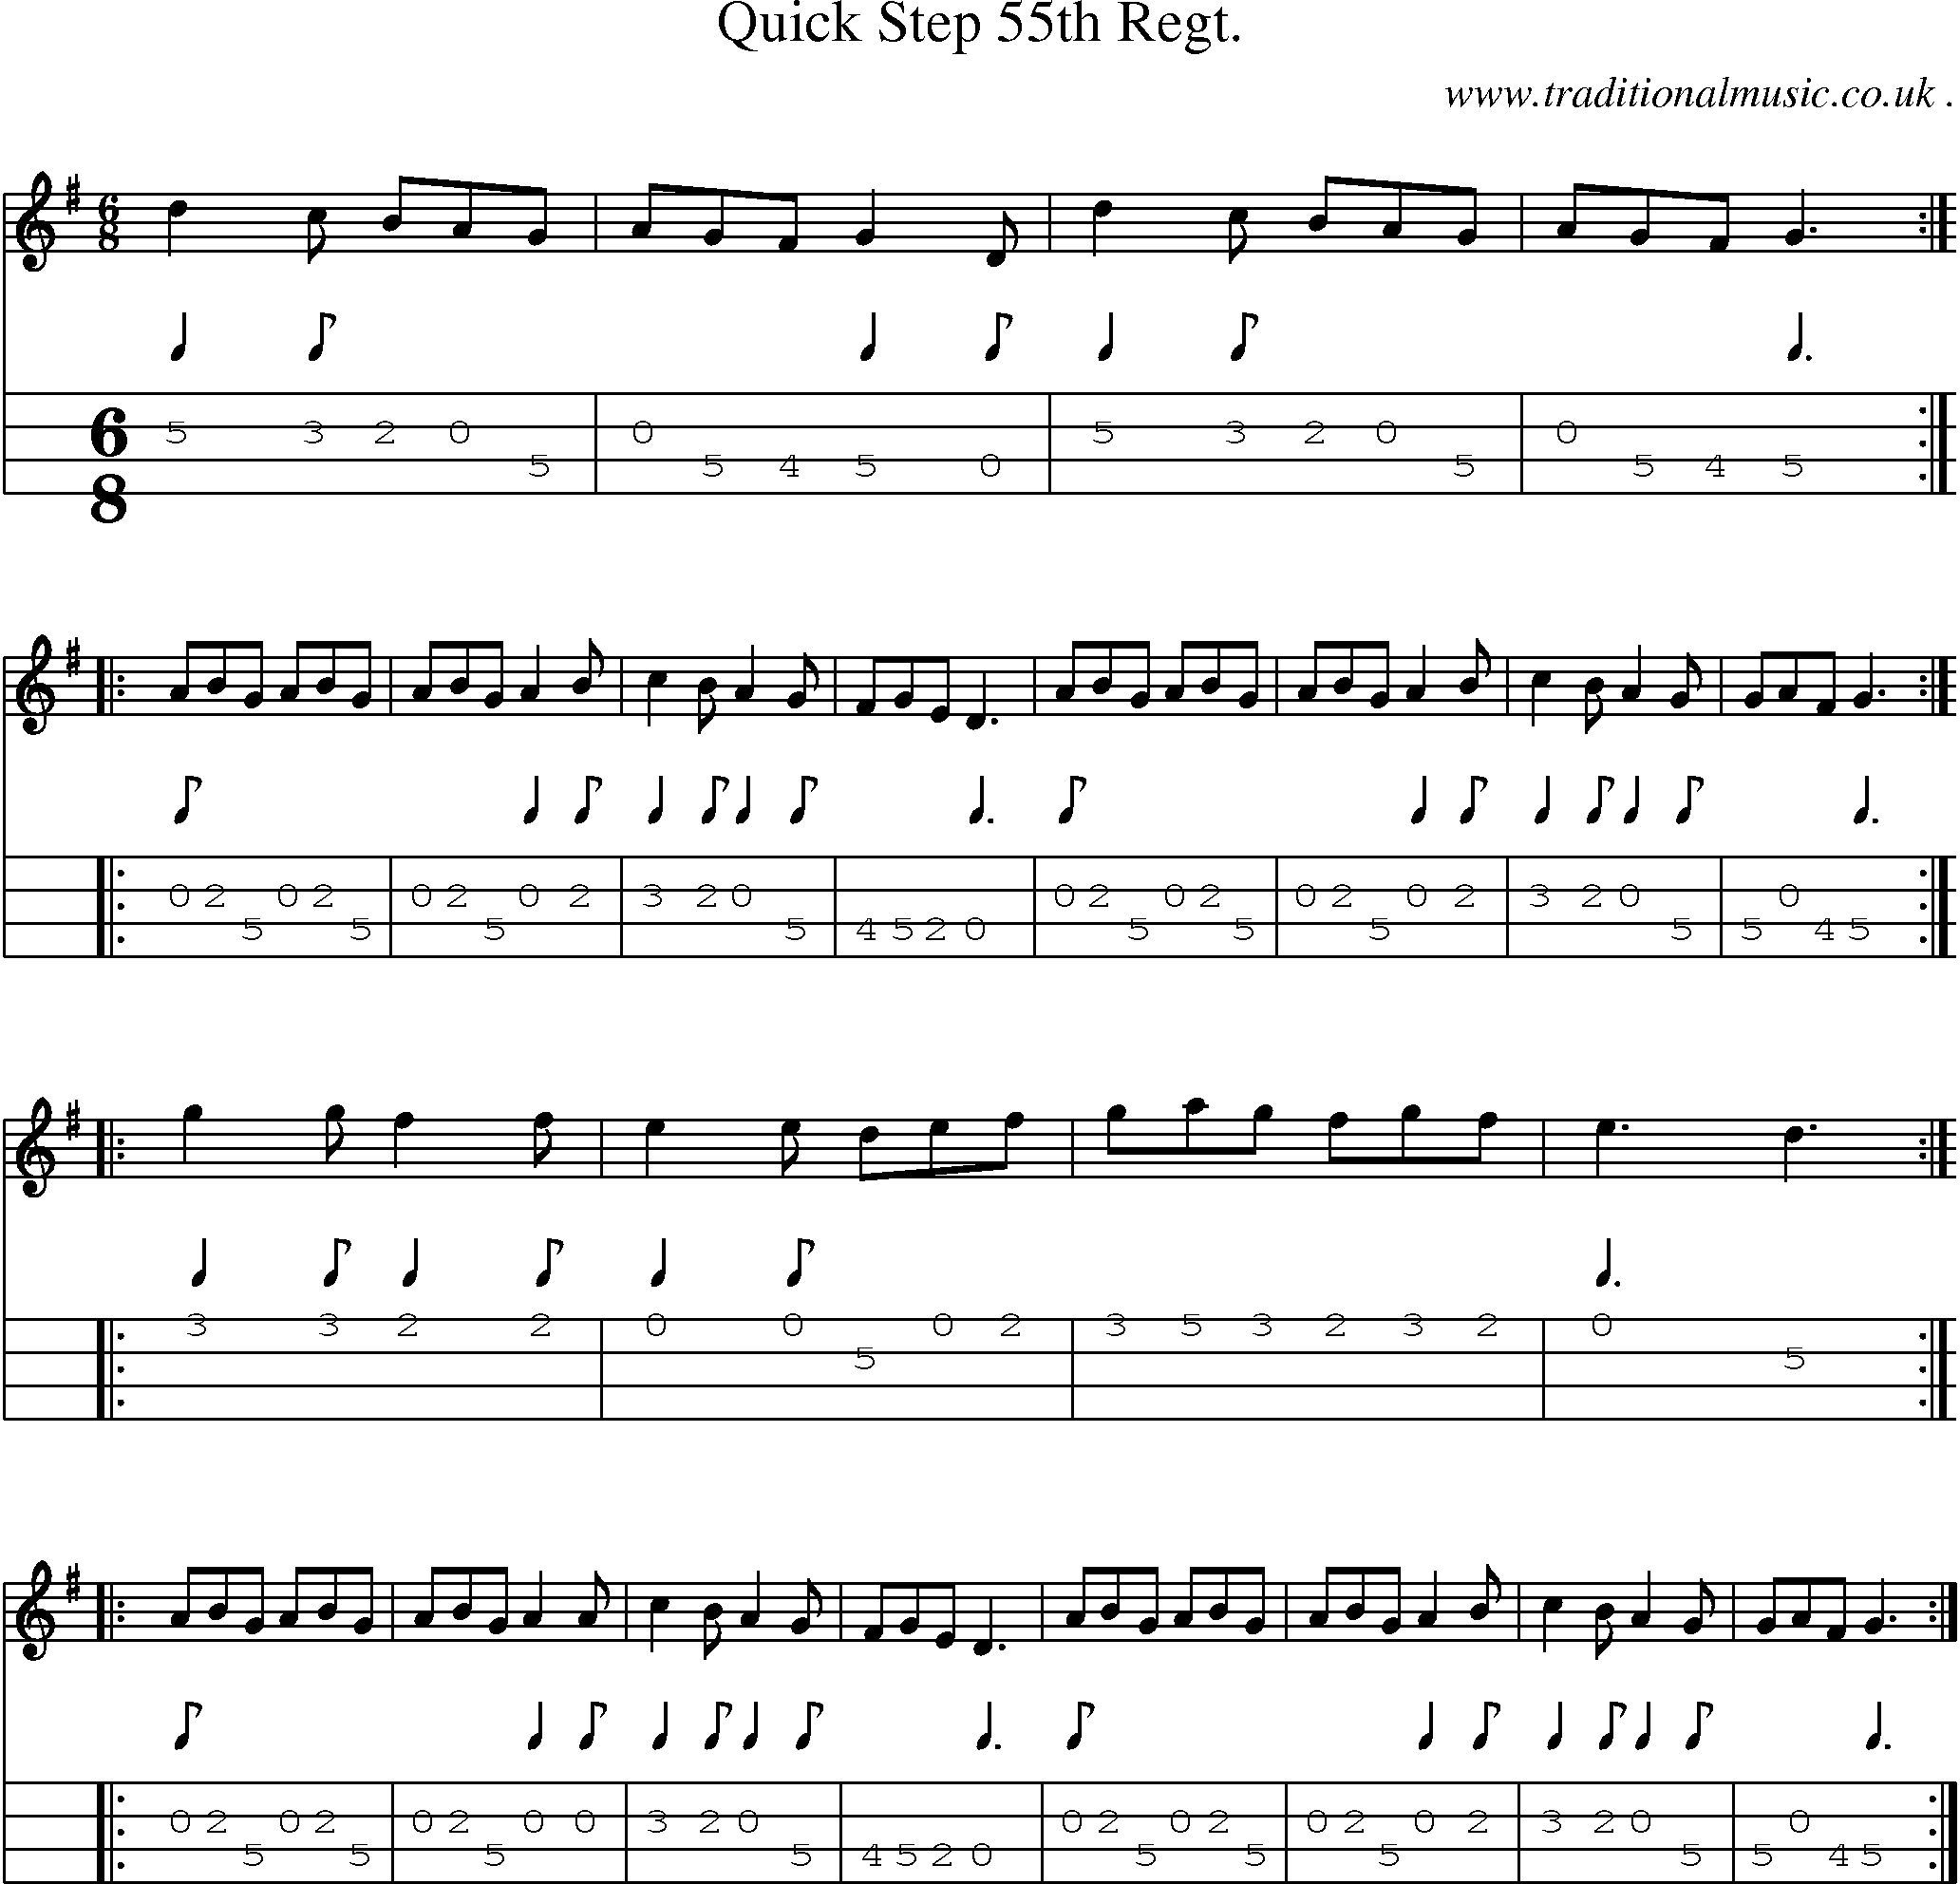 Sheet-Music and Mandolin Tabs for Quick Step 55th Regt